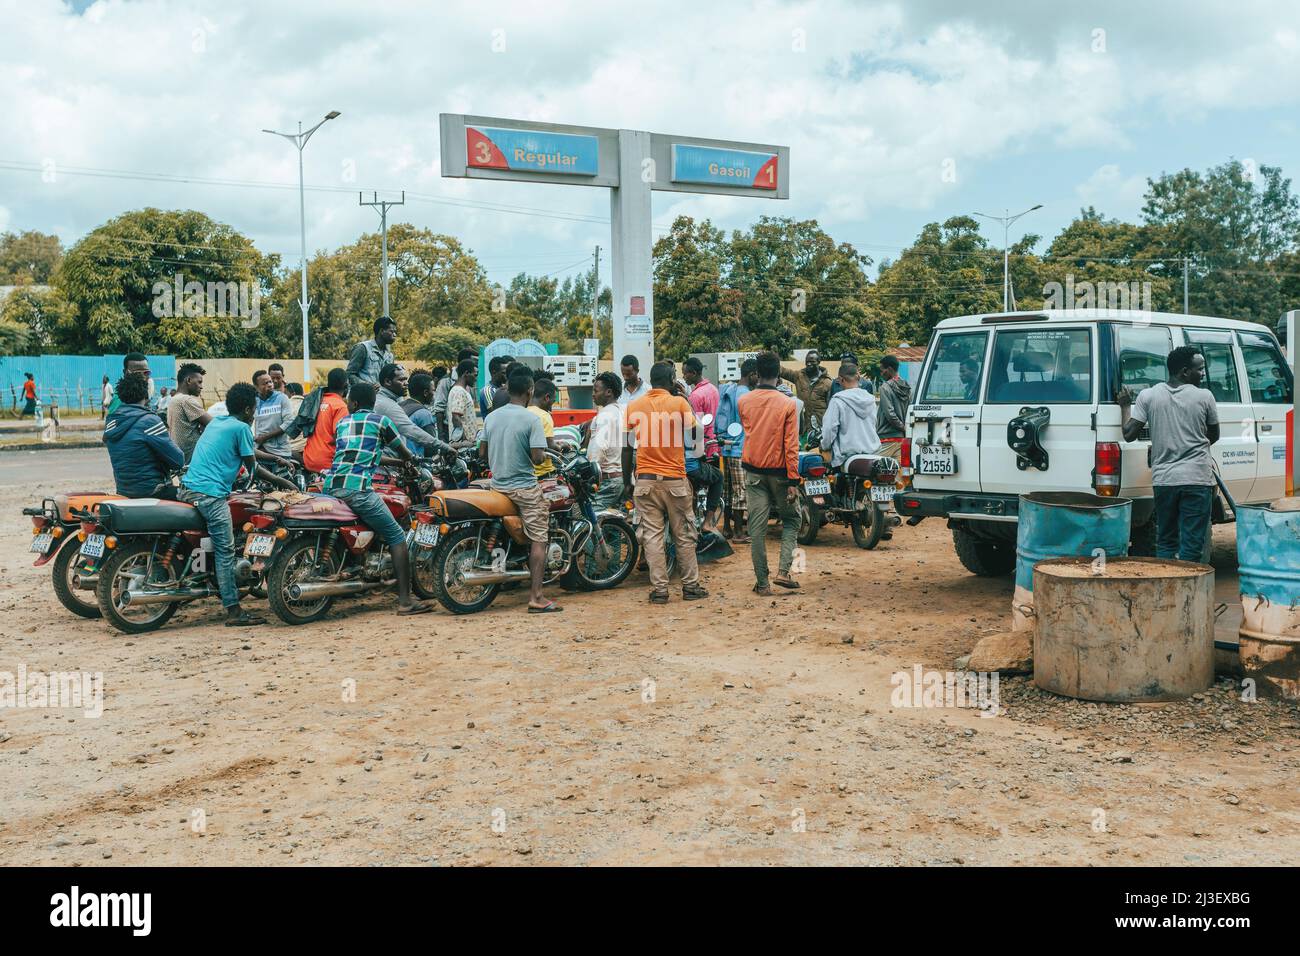 Jinka, Southern Nations Ethiopia - May 16, 2019: Young Ethiopian men, bikers, waiting at a gas station for refueling. City Jinka, Southern Nations Eth Stock Photo